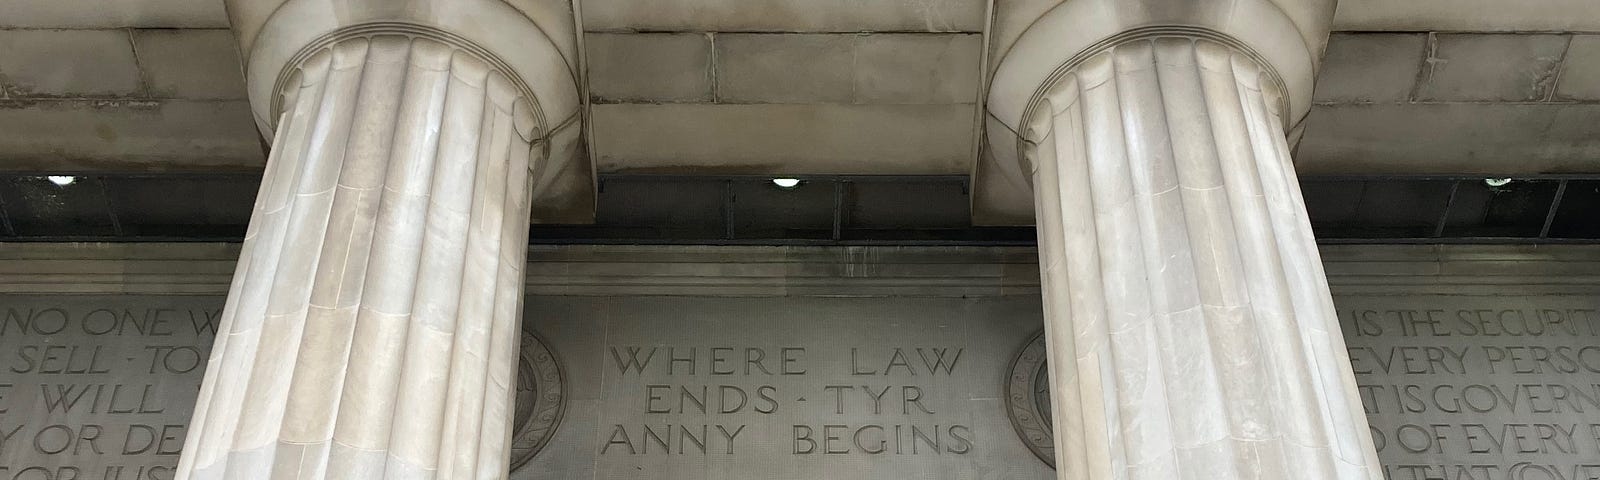 Civil Courts building with doric columns and engraving above door: “Where Law Ends Tyranny Begins.”